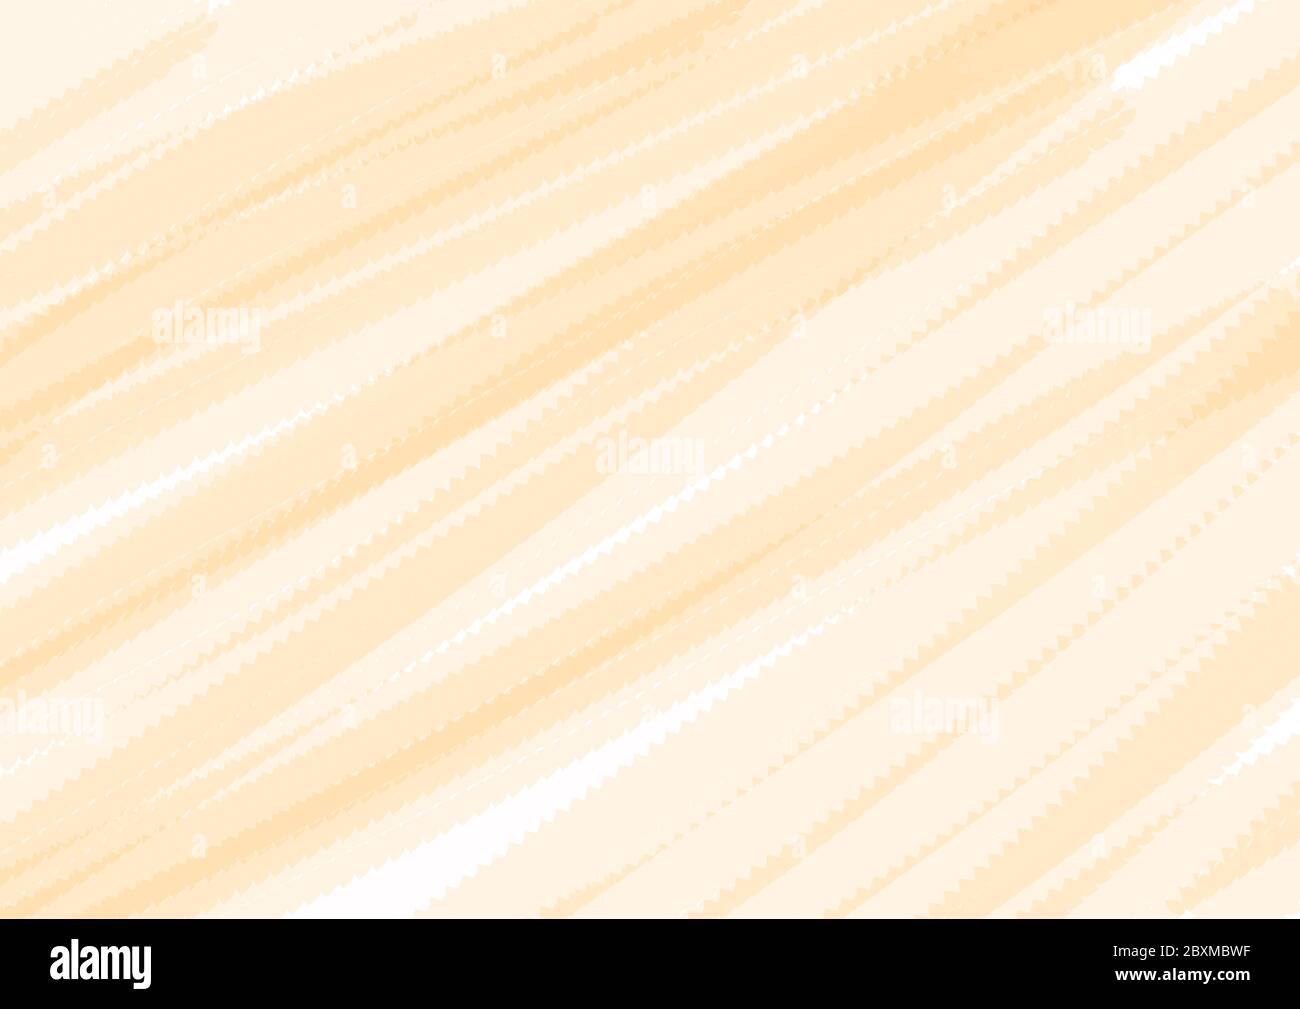 Abstract light pastel yellow and white strip pattern background for wallpaper or design work Stock Photo